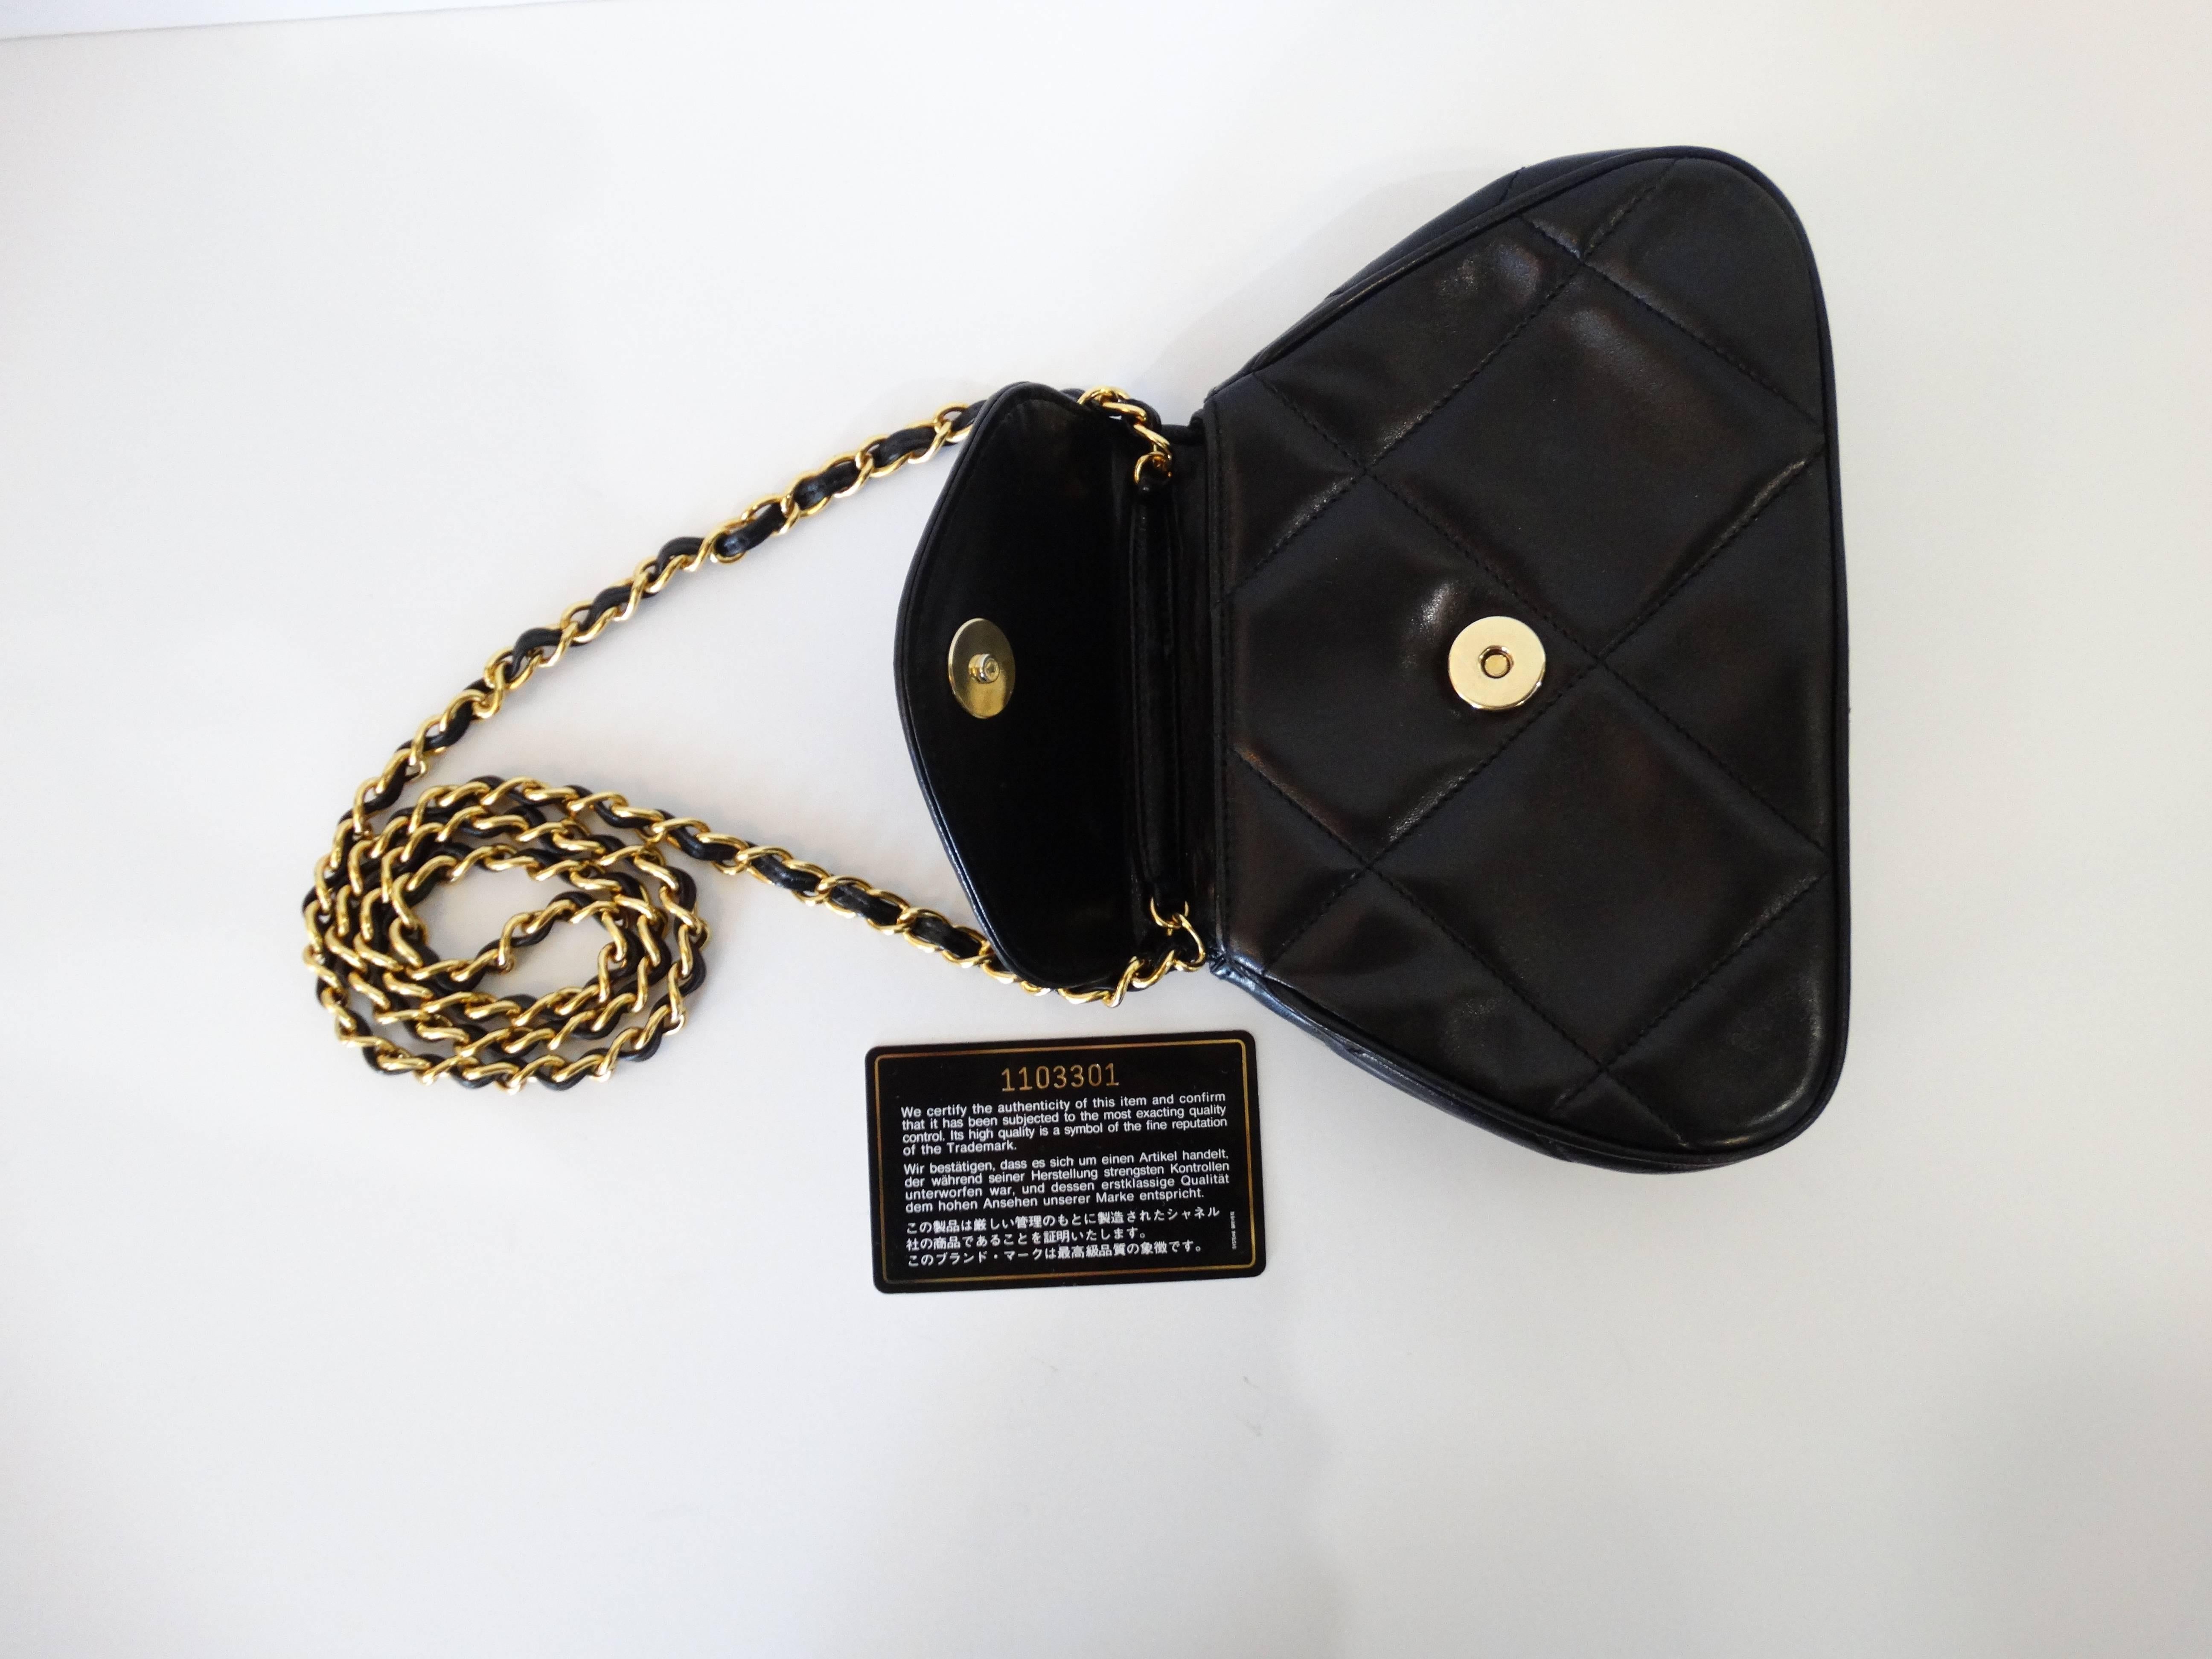 Adorable 1990s Chanel bag in the softest lambskin leather! Incredible rich jet black color makes this piece SO versatile! Iconic quilted pattern with CC logo stitched into the flap. Classic gold chain- easily tucked in and worn as a clutch. In